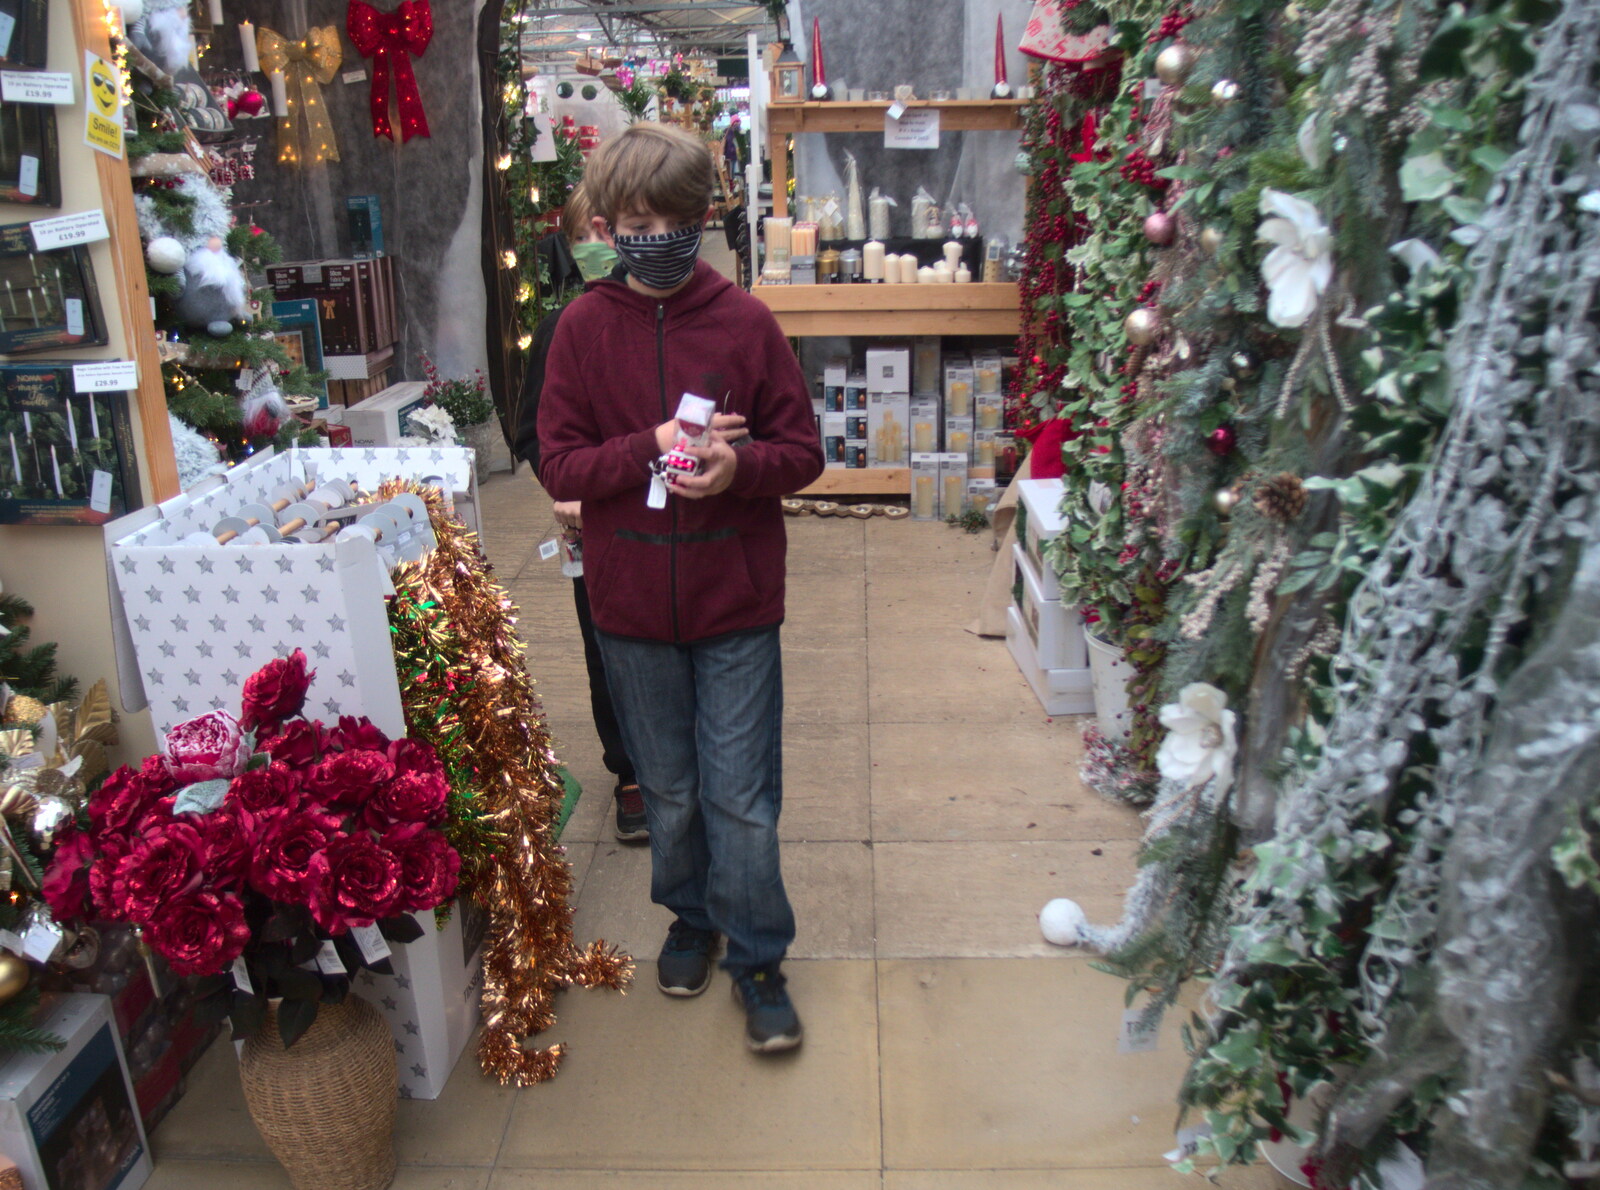 Fred's got some things to buy from Frosty Rides and a Christmas Tree, Diss Garden Centre, Diss, Norfolk - 29th November 2020